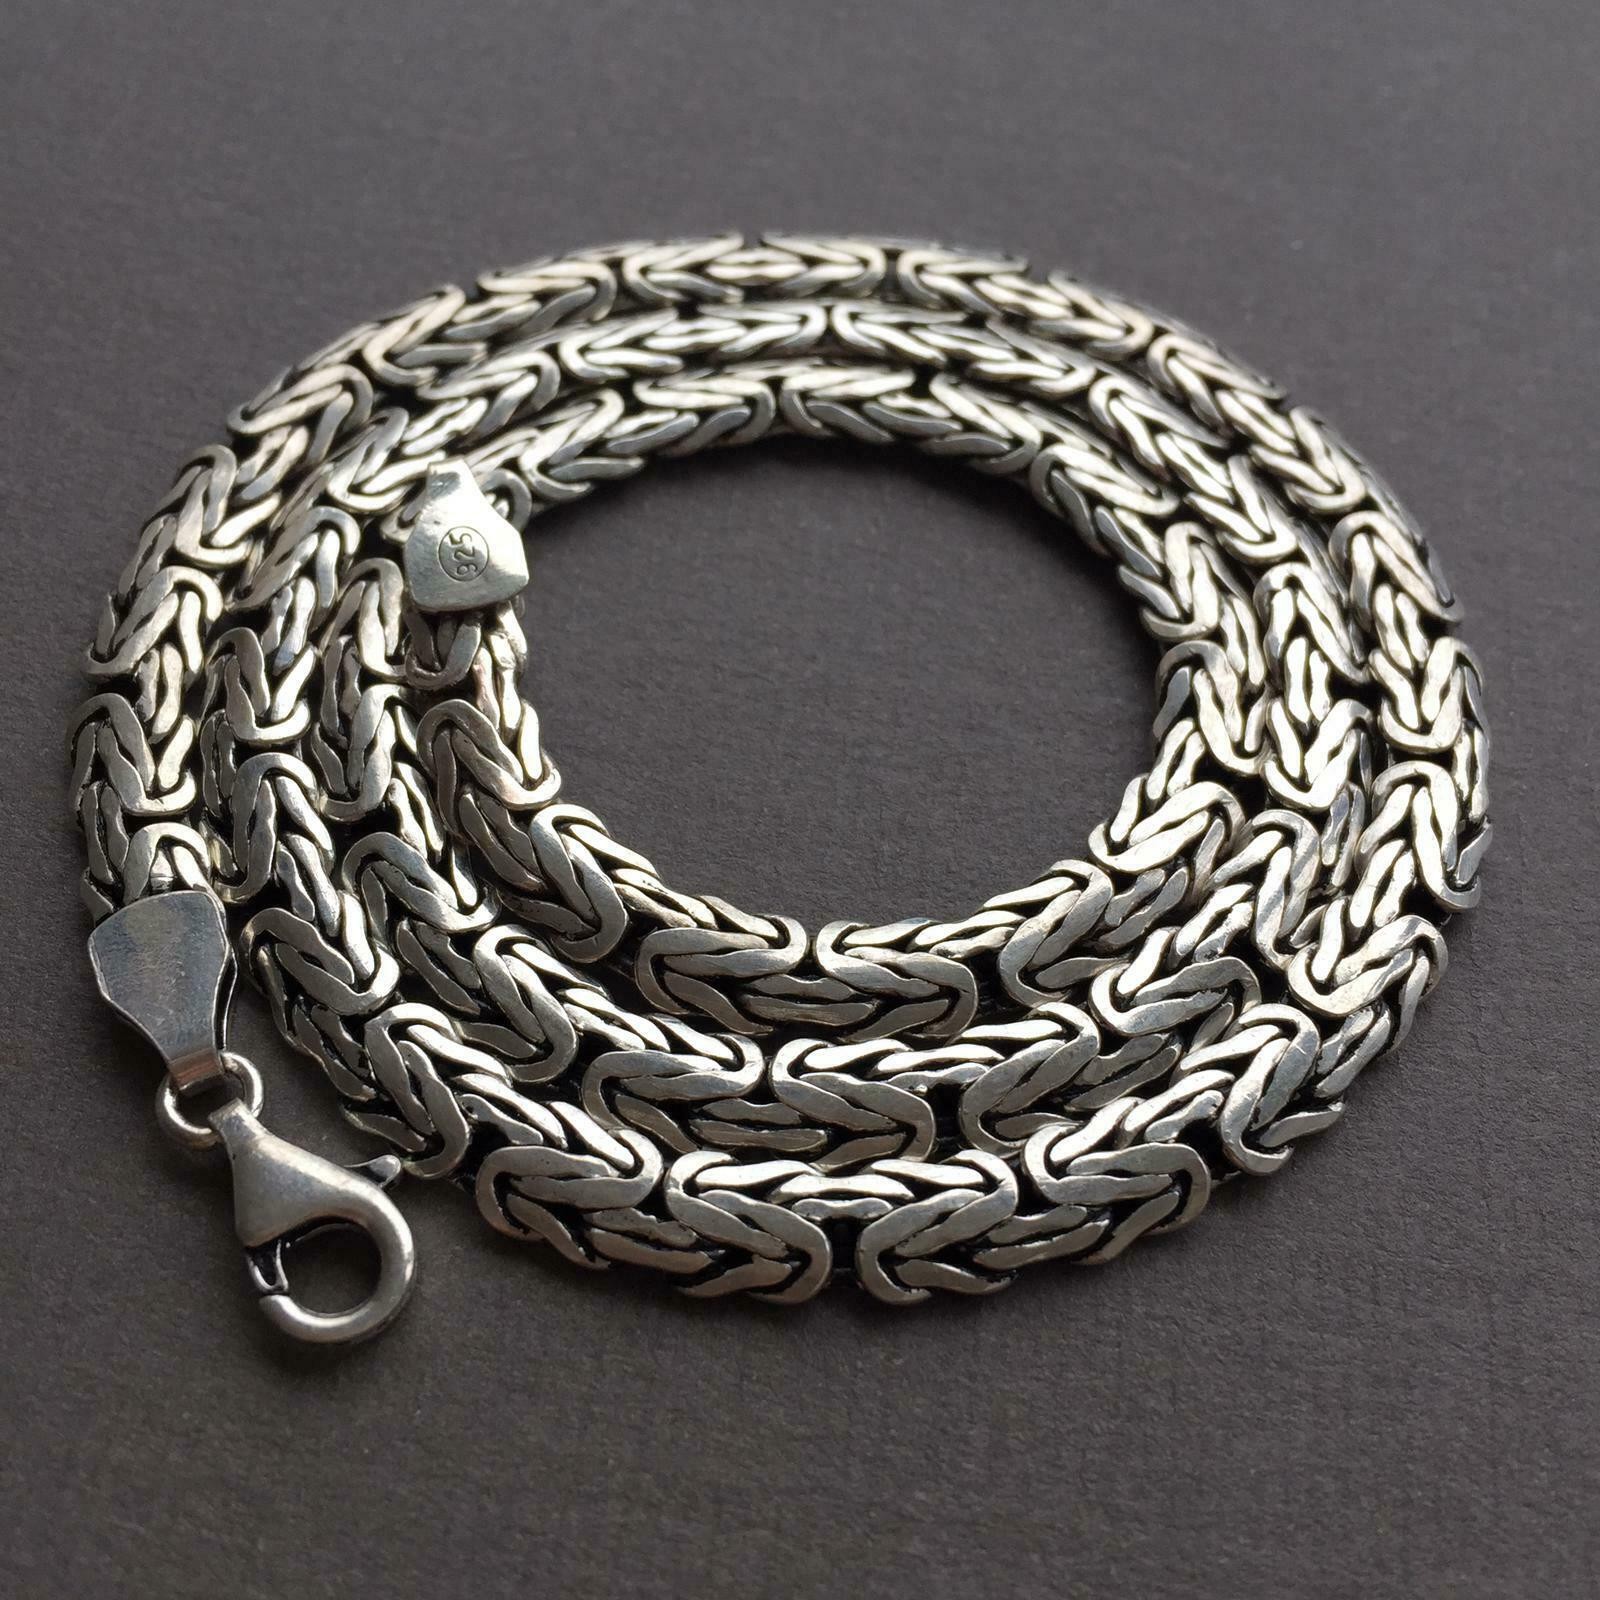 65 Cm / 26 In Mens Bali King Byzantine Chain Necklace 925 Sterling Silver - Image 4 of 4